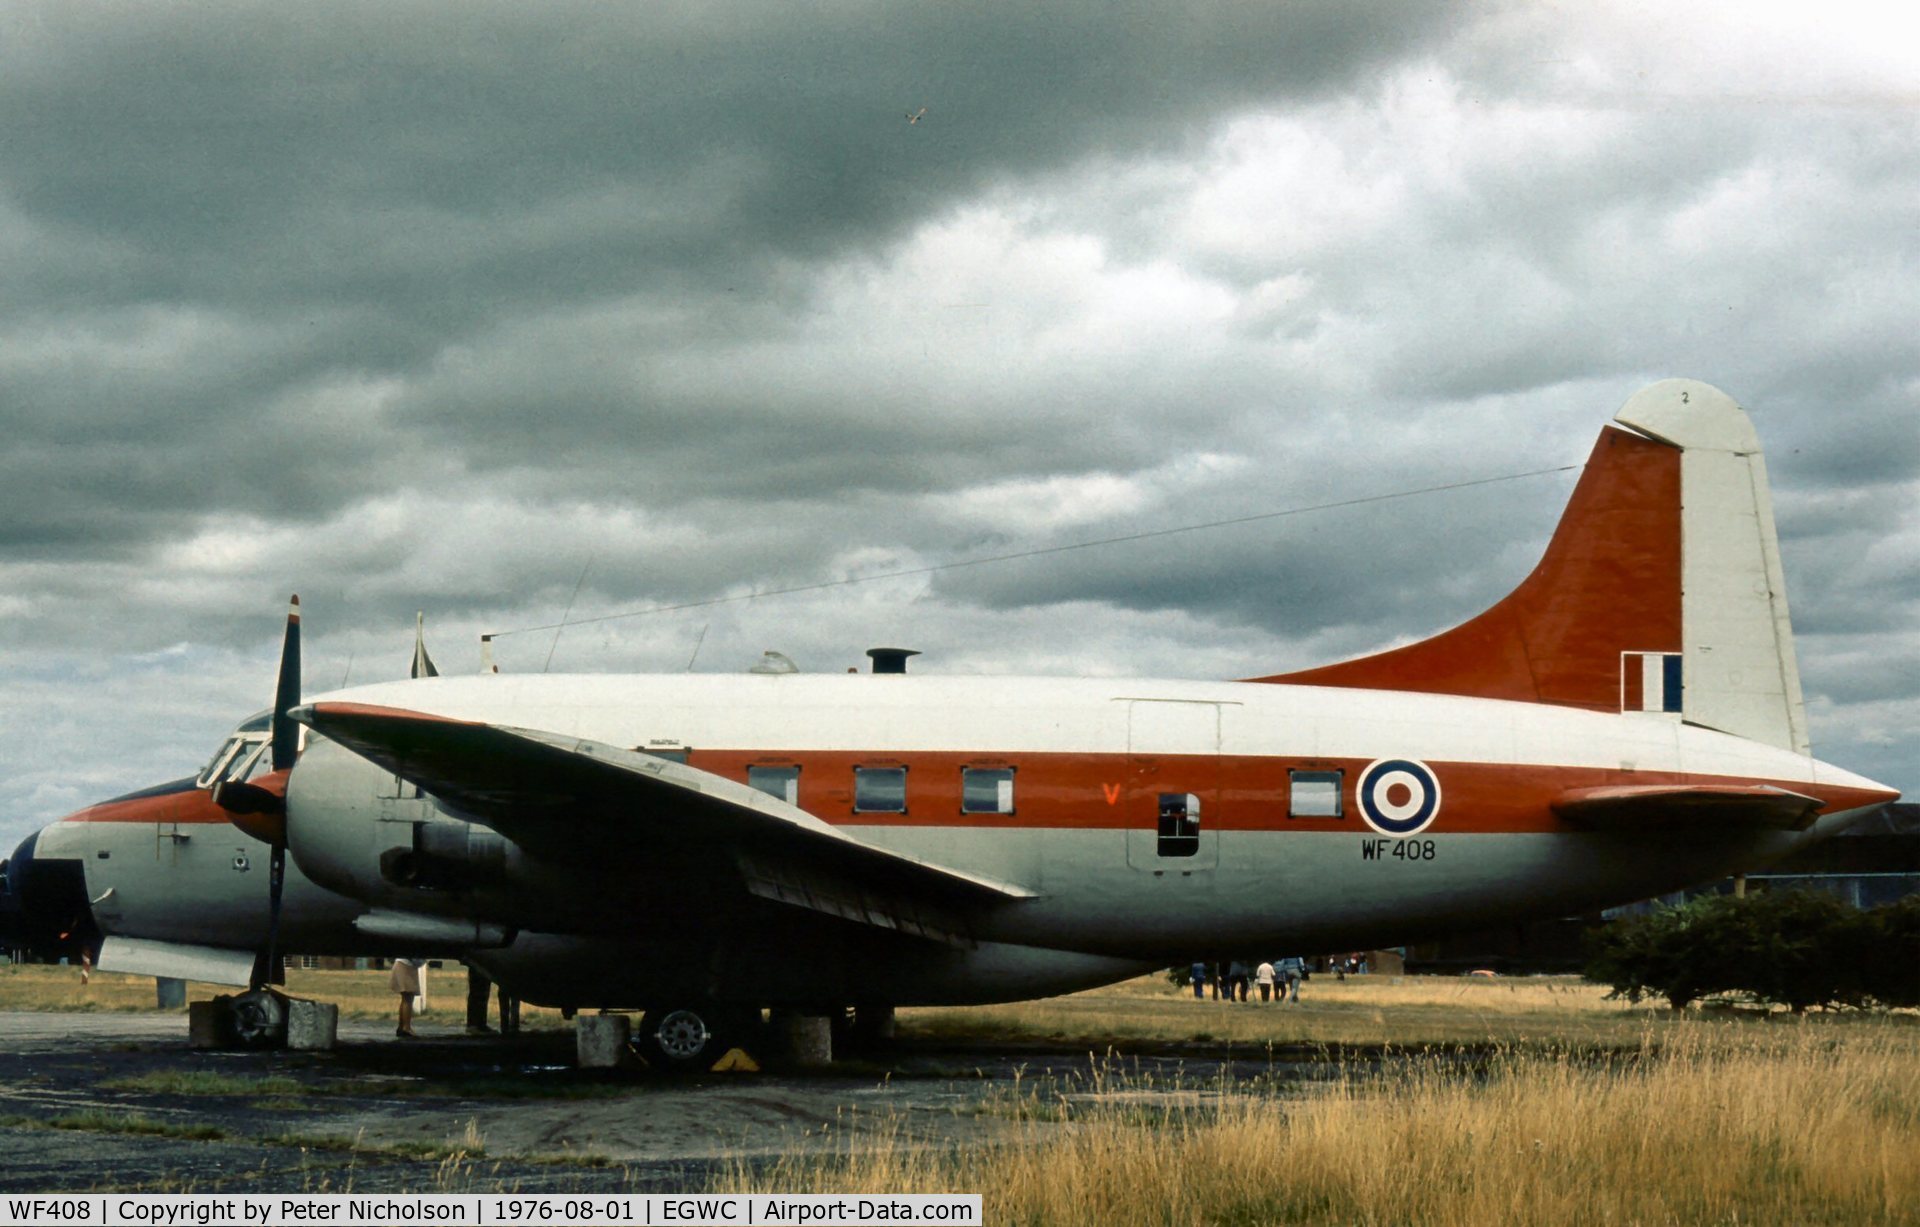 WF408, 1952 Vickers Varsity T.1 C/N 554, Another view of the Varsity on display at Cosford in the Summer of 1976.